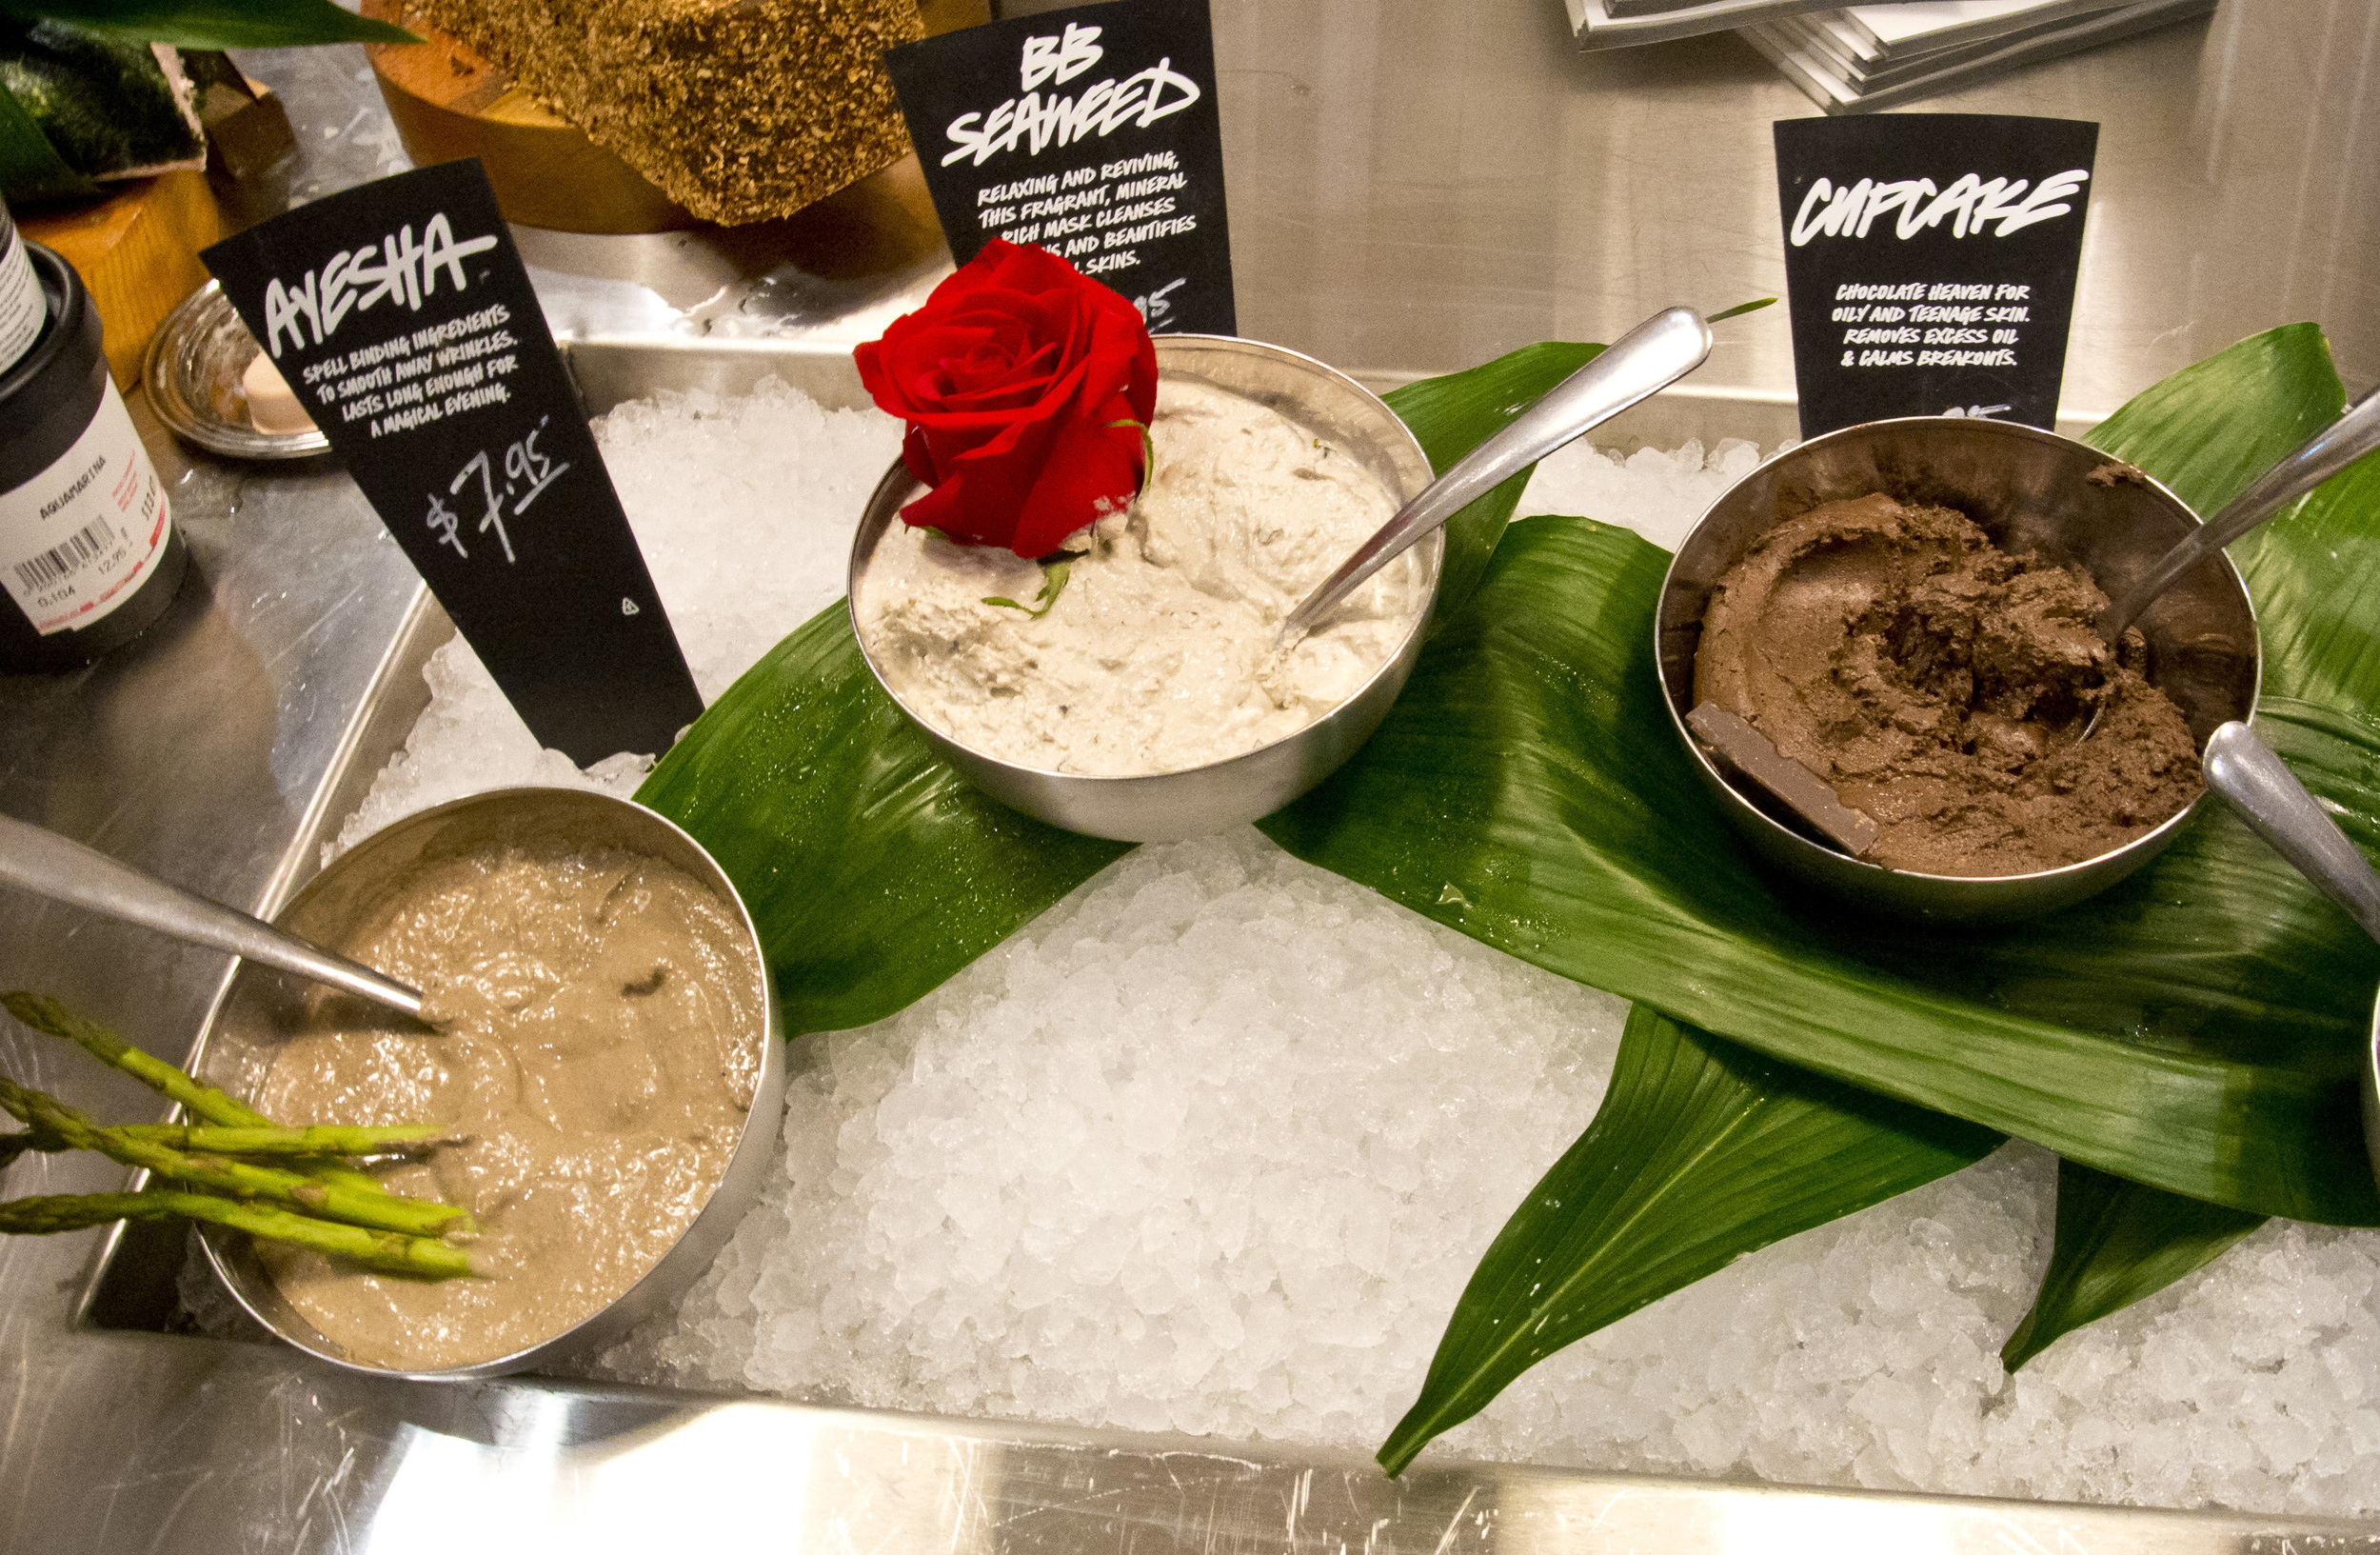 More of Lush's Fresh Face Masks. Take your pick.